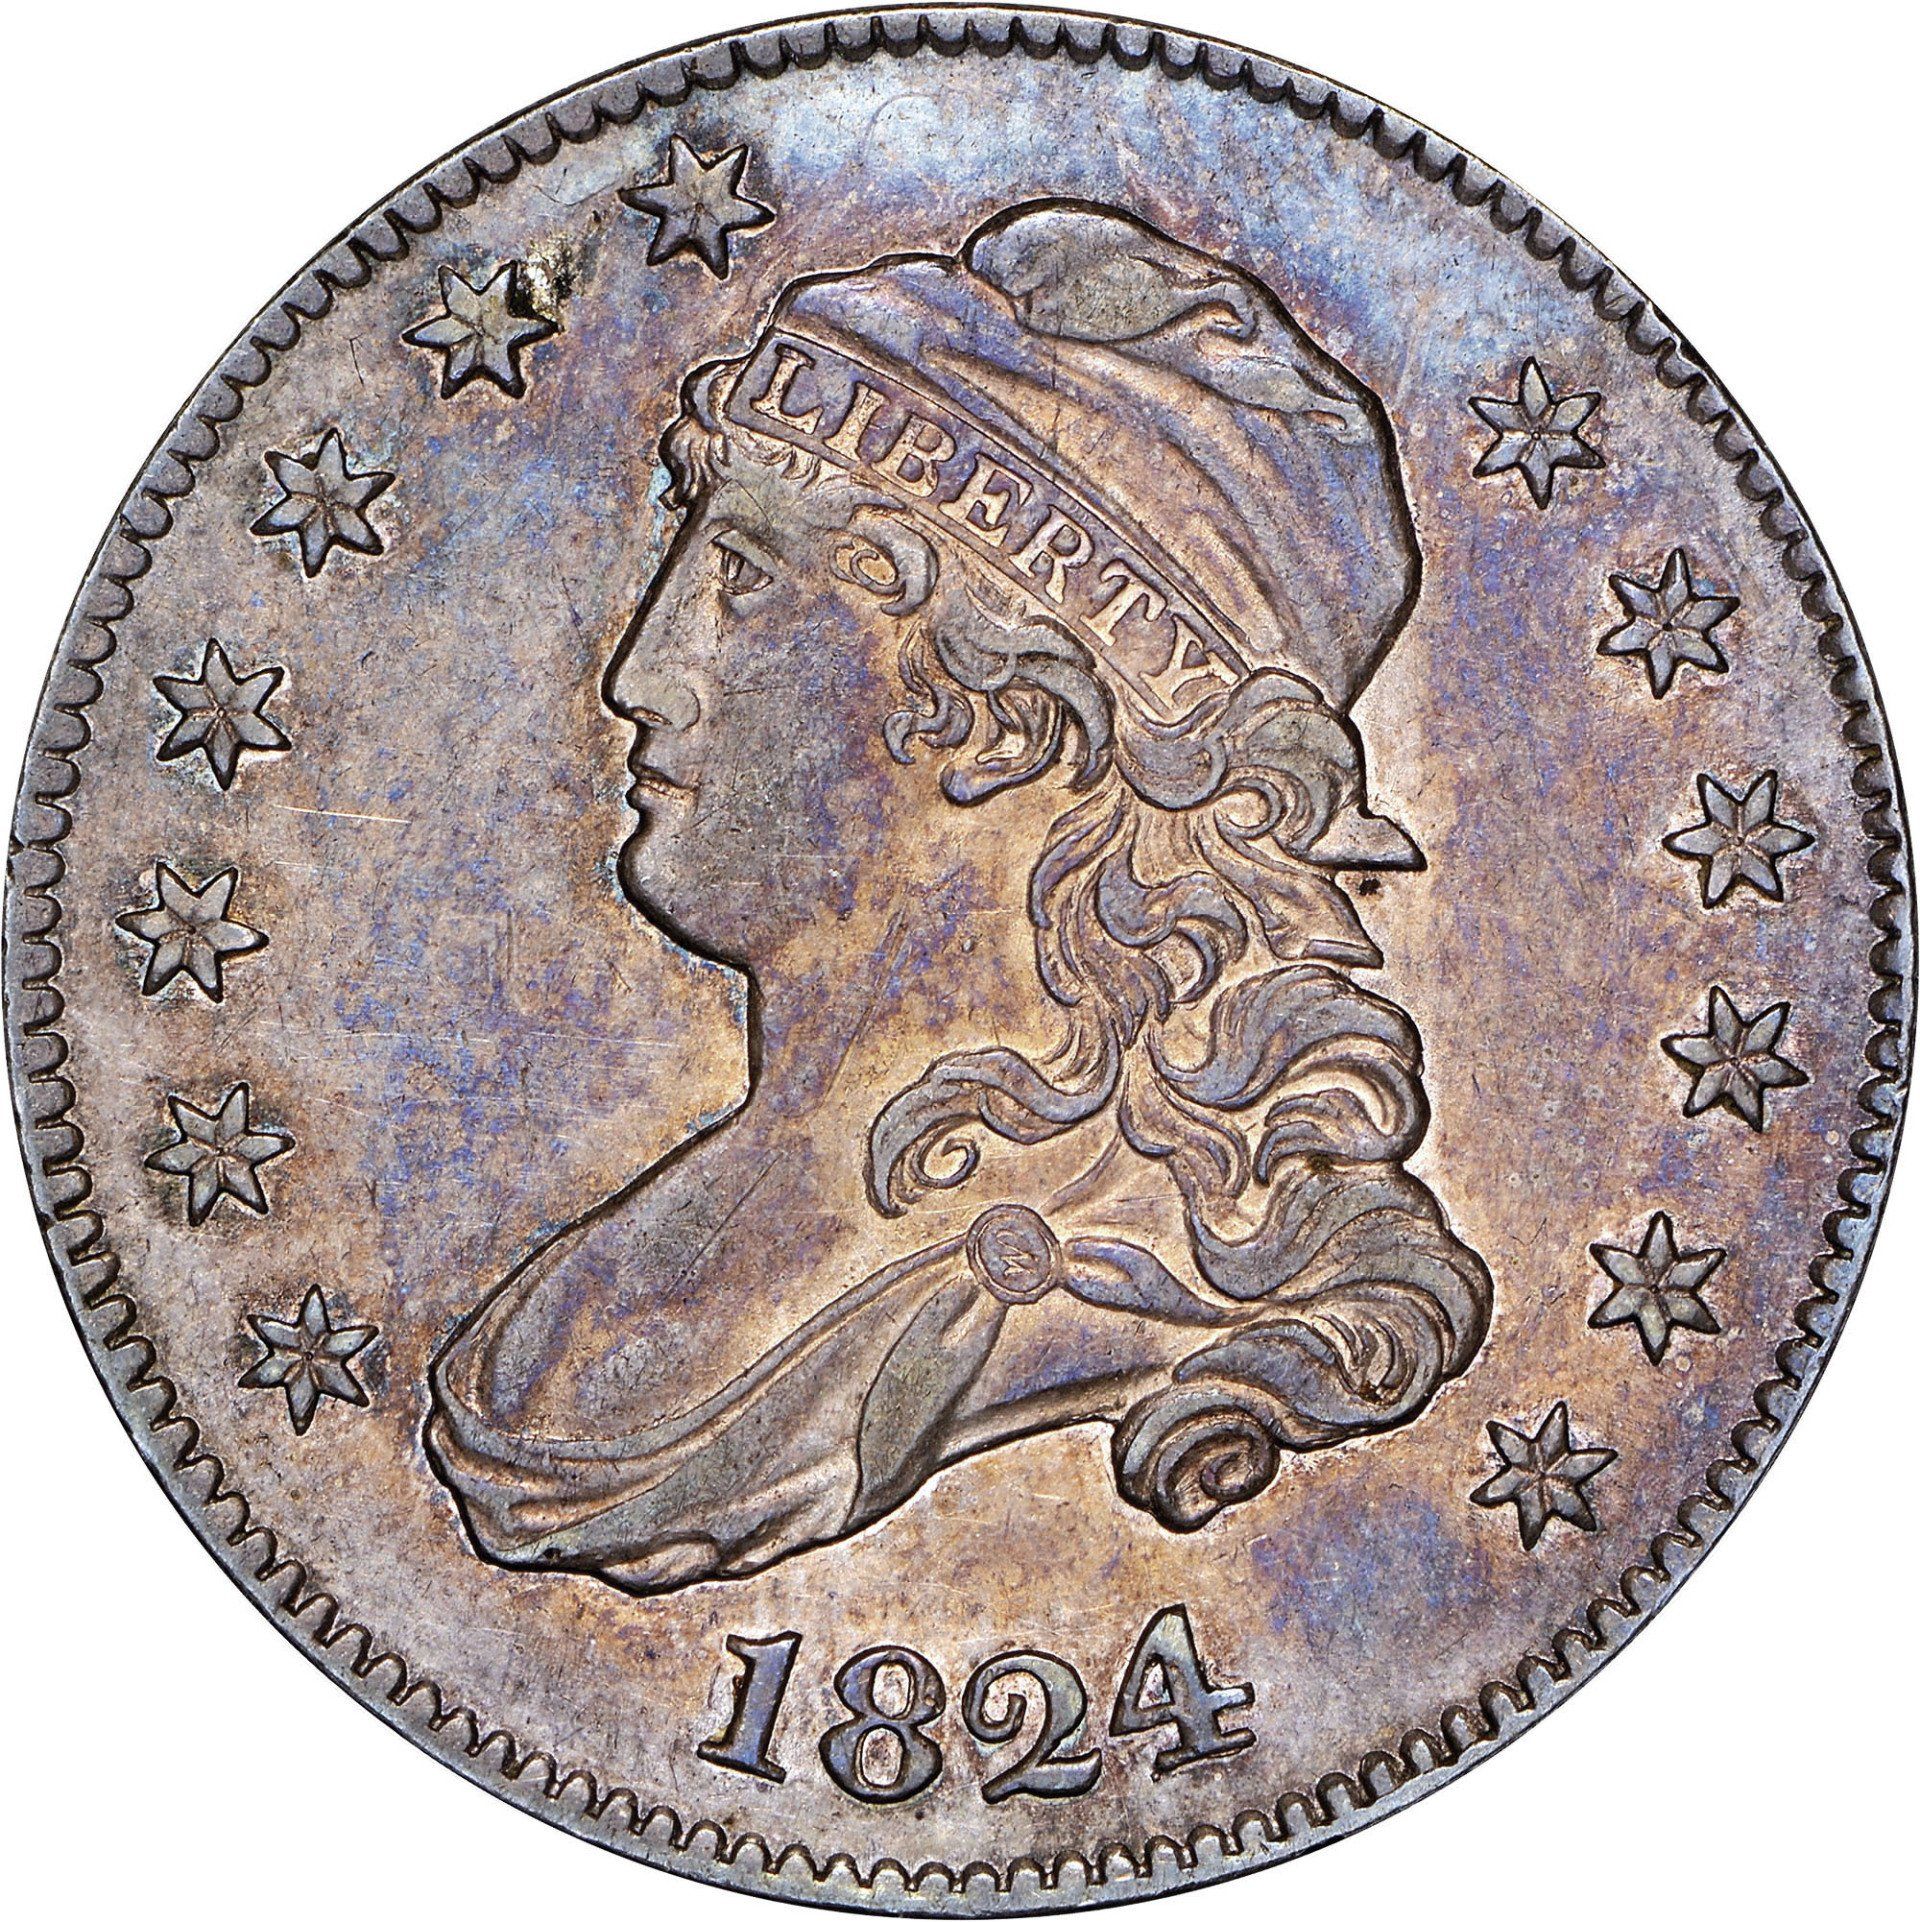 1824 Capped Bust quarter image courtesy of NGC